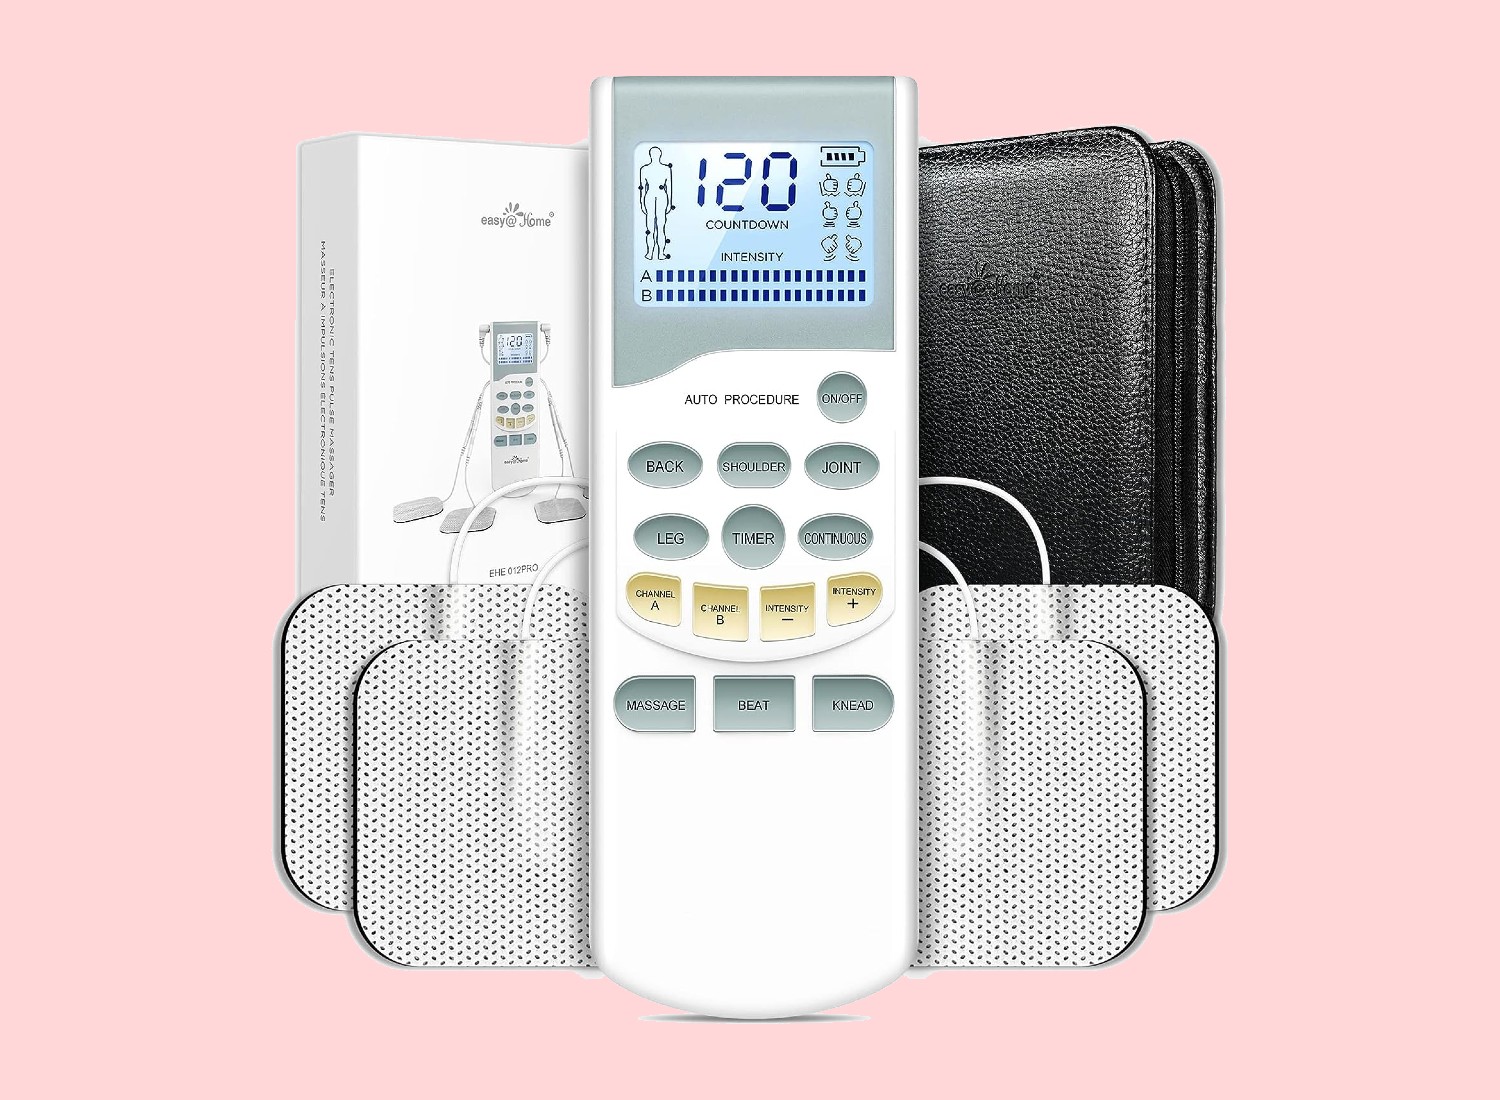 Easy@Home Electronic Pain Relief Stimulator: TENS Unit Wireless Muscle